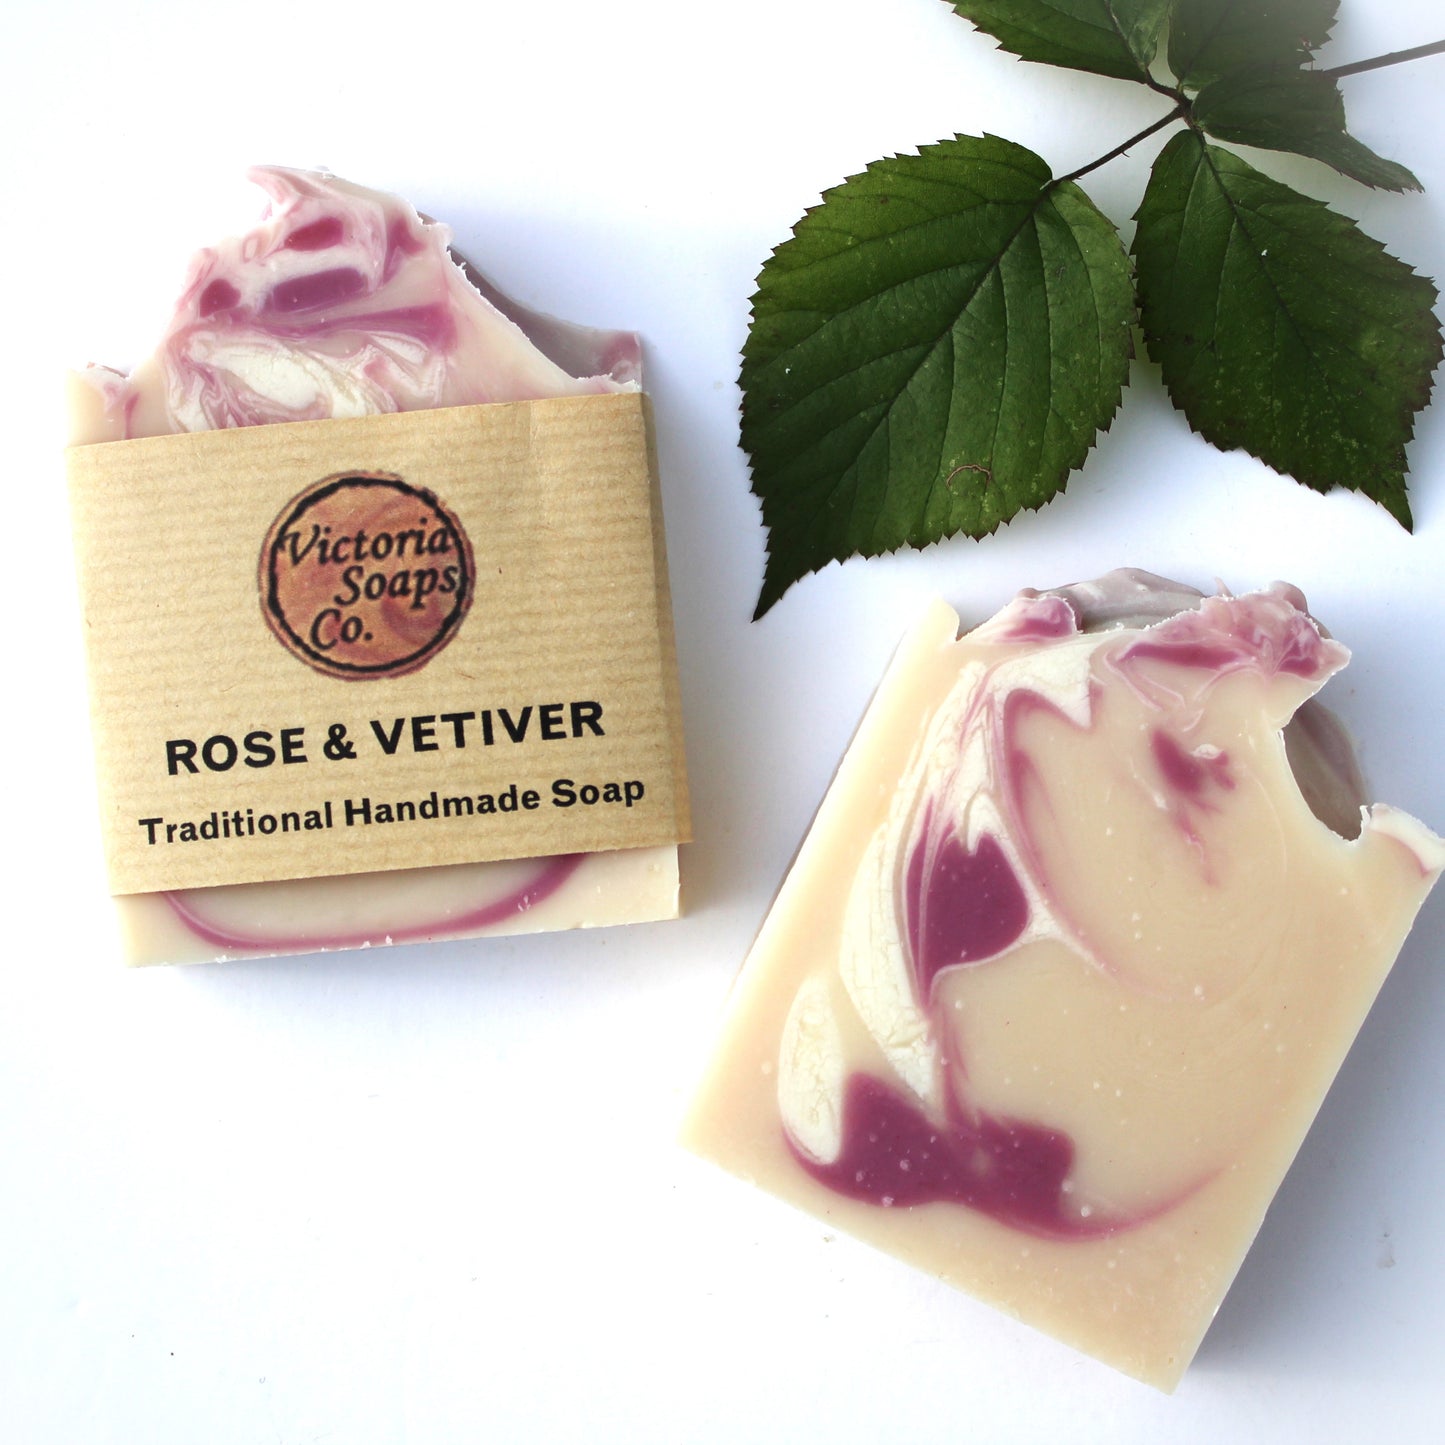 ROSE & VETIVER Handmade Soap, Lotion Bar and Tealight Candles Gift Set for Hands and Body